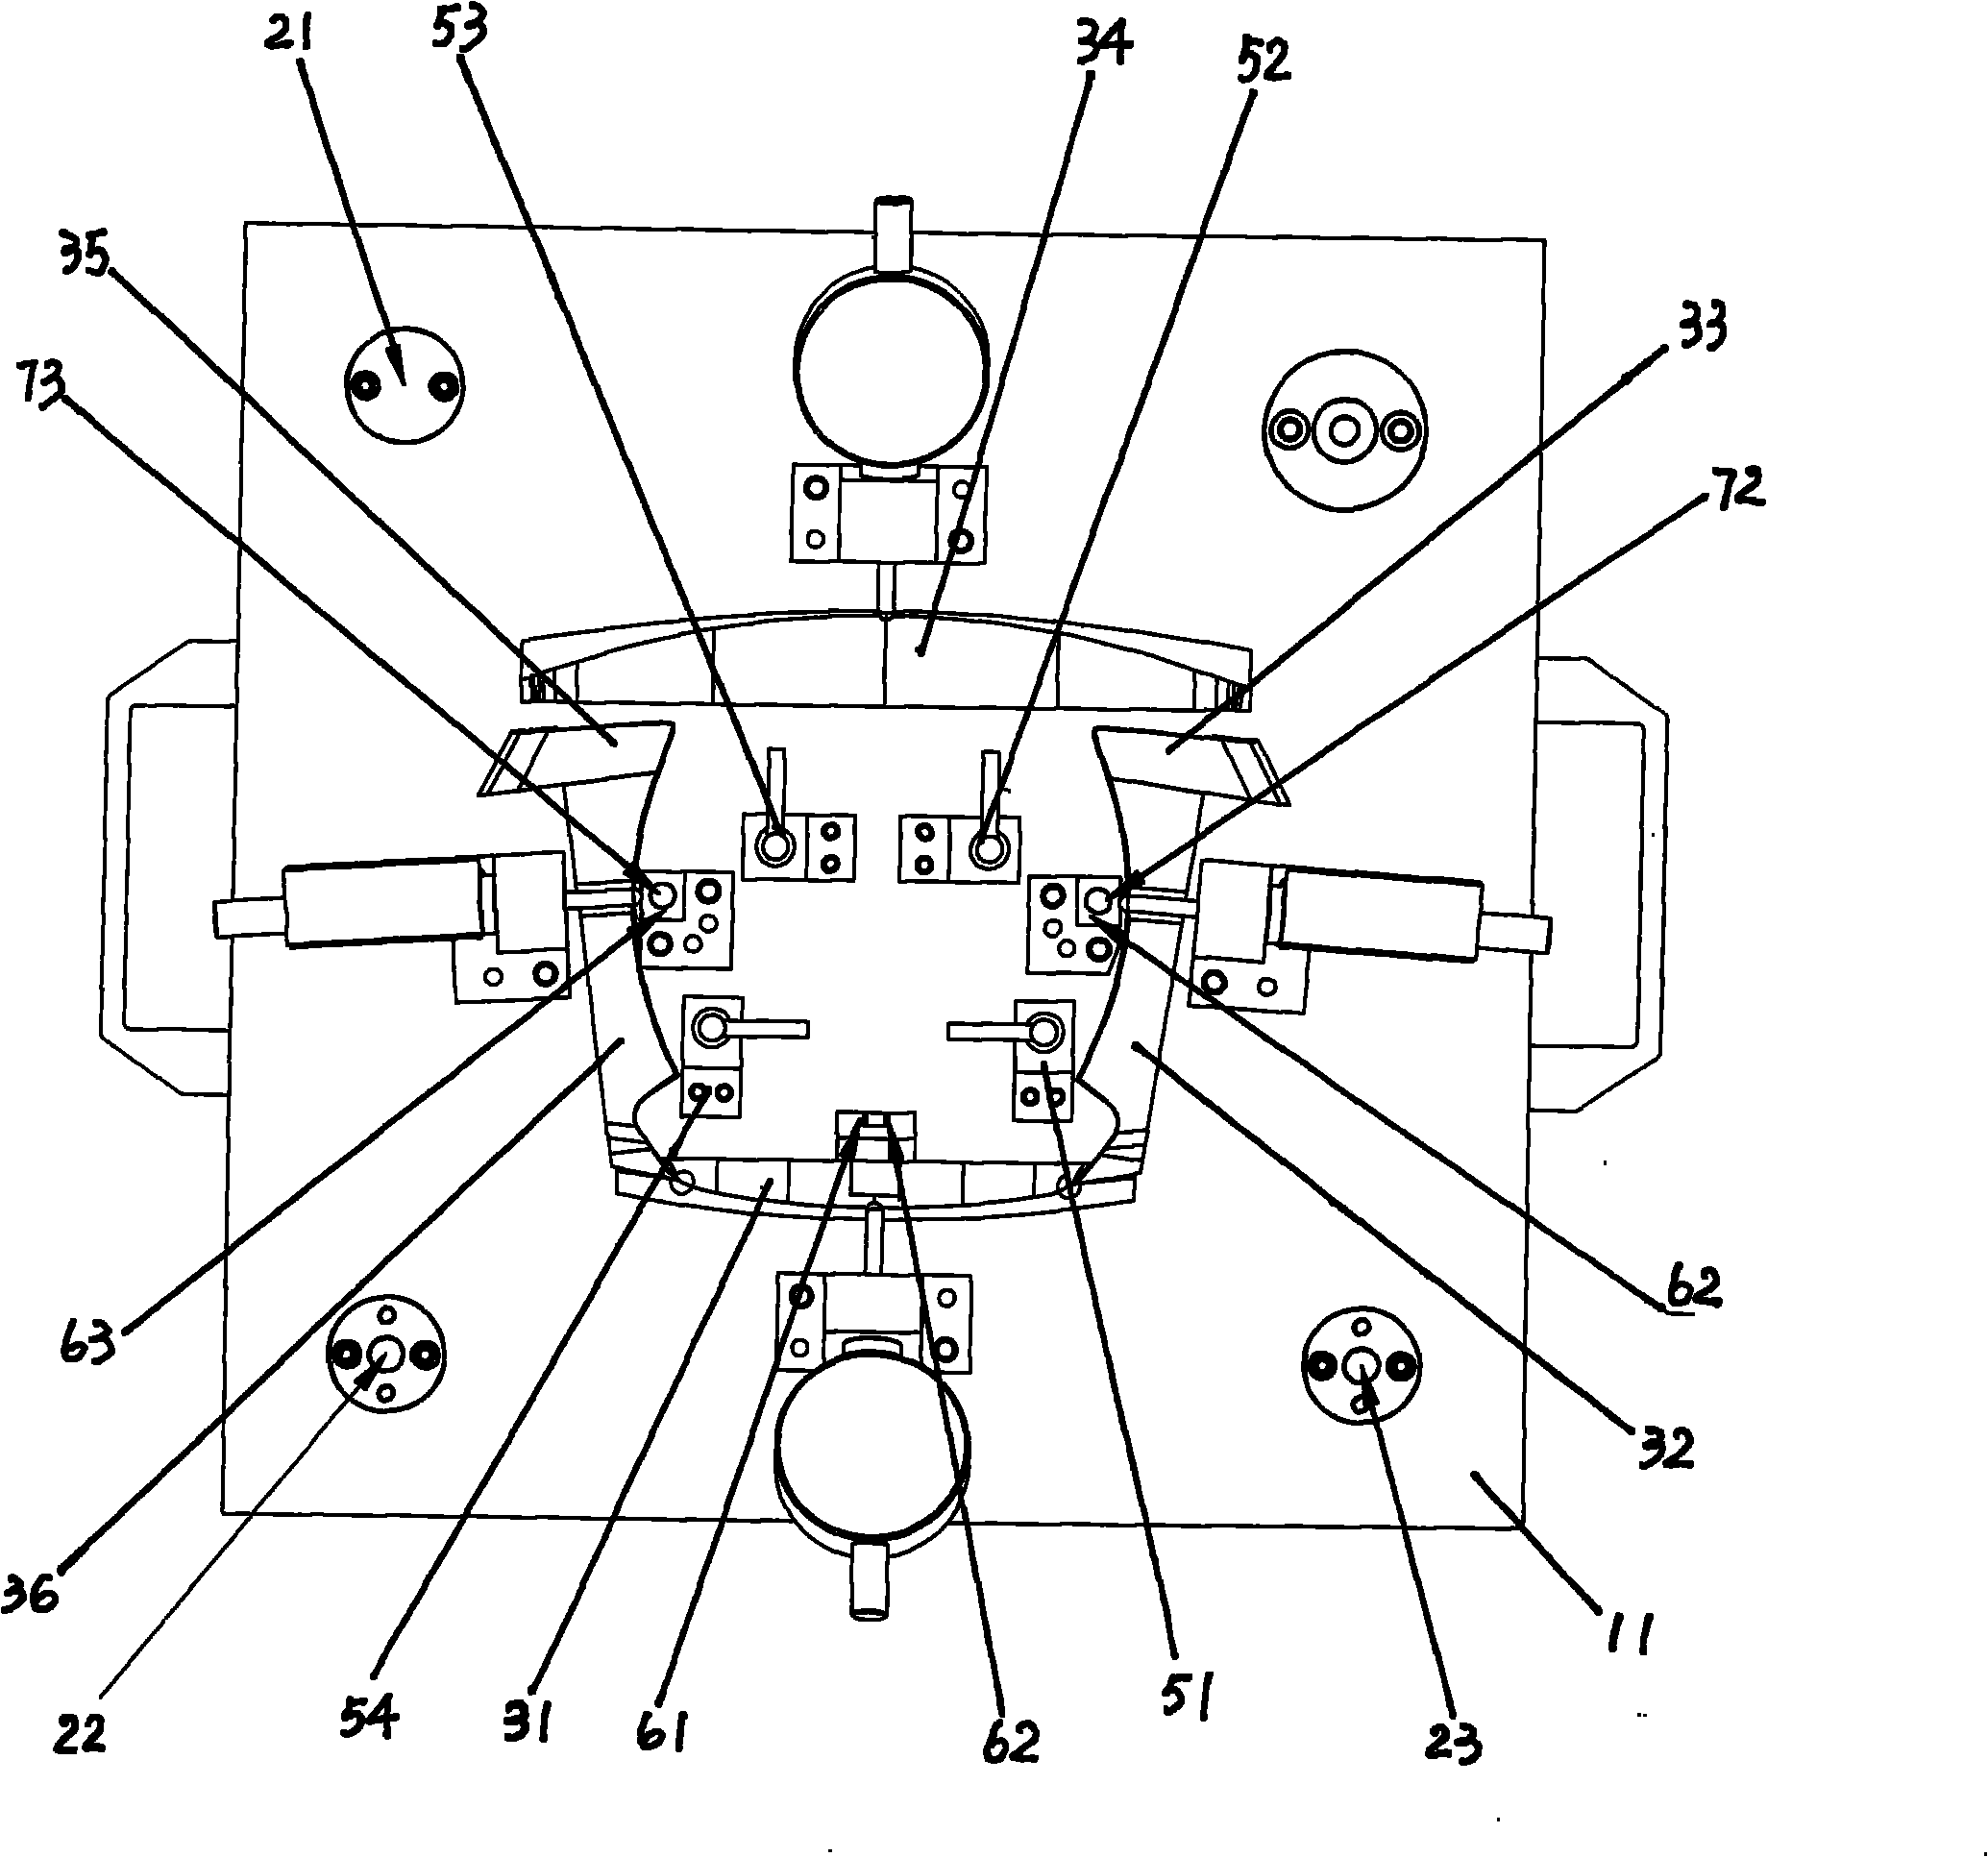 Gap detection device of safety airbag